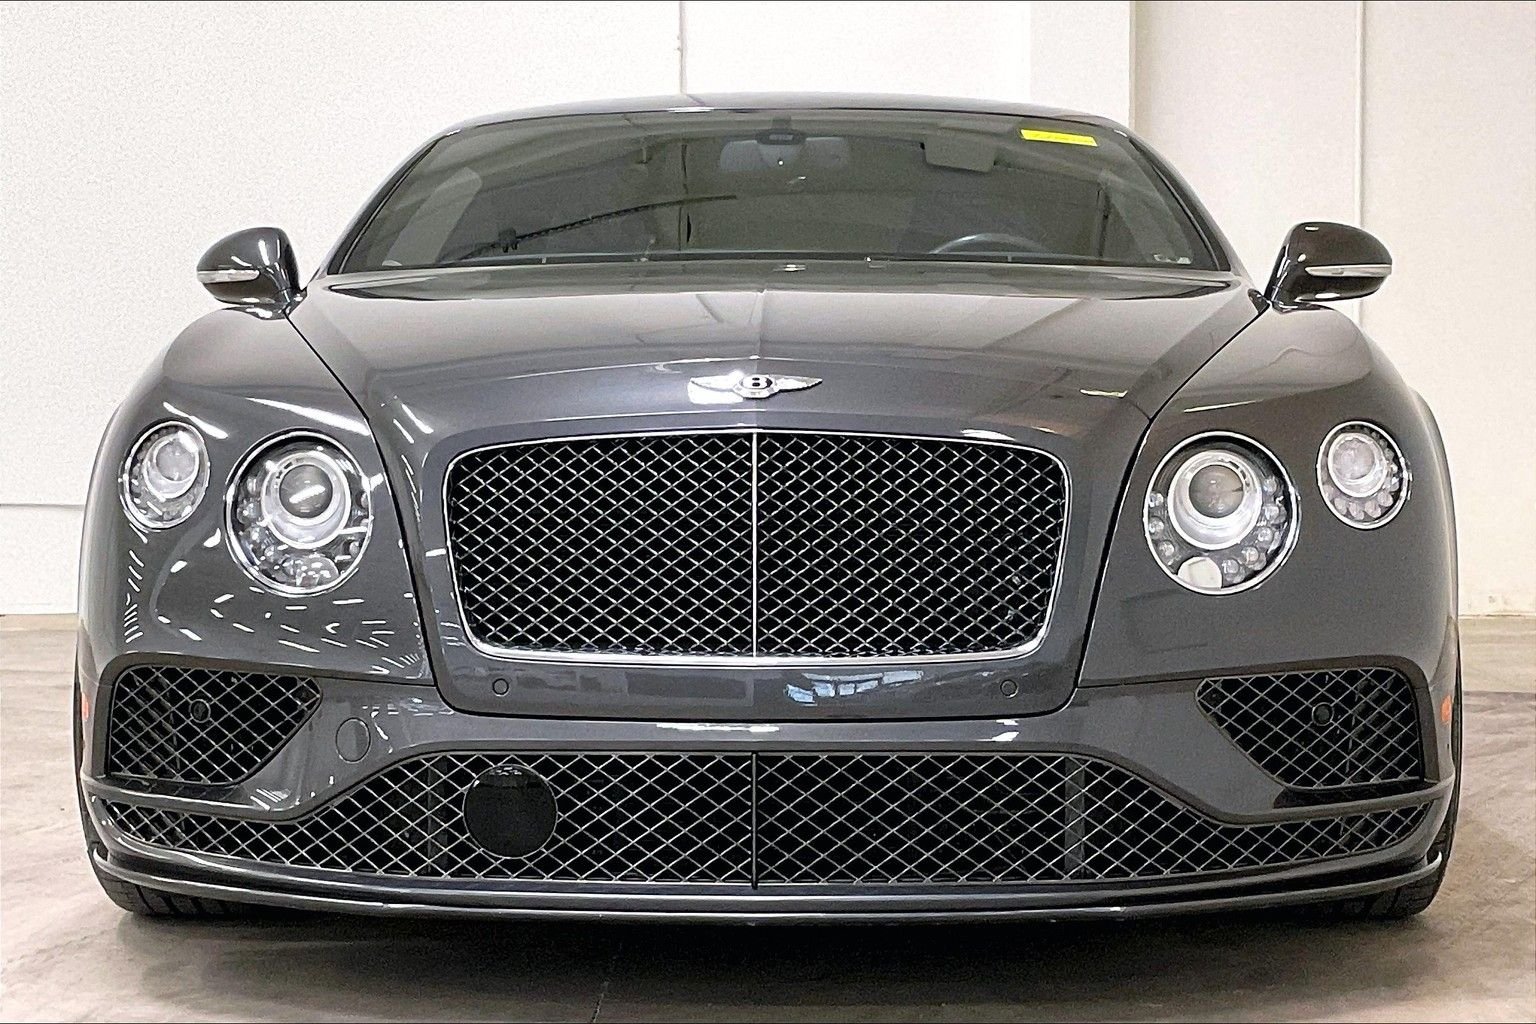 Used 2016 Bentley Continental GT Speed with VIN SCBFJ7ZA6GC057553 for sale in San Rafael, CA